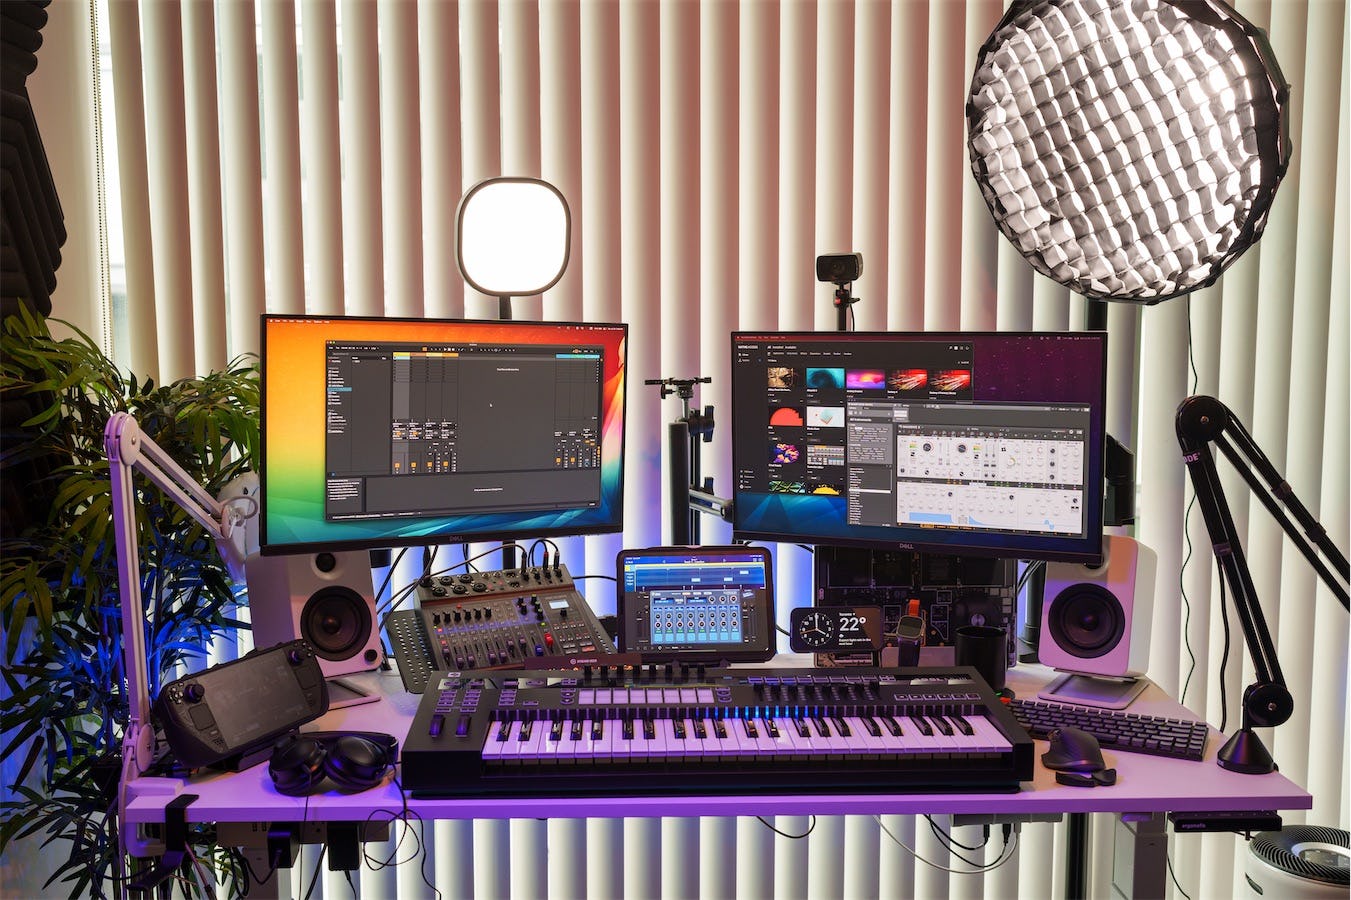 Same desk setup but this time with a Novation Keyboards with 49 keys